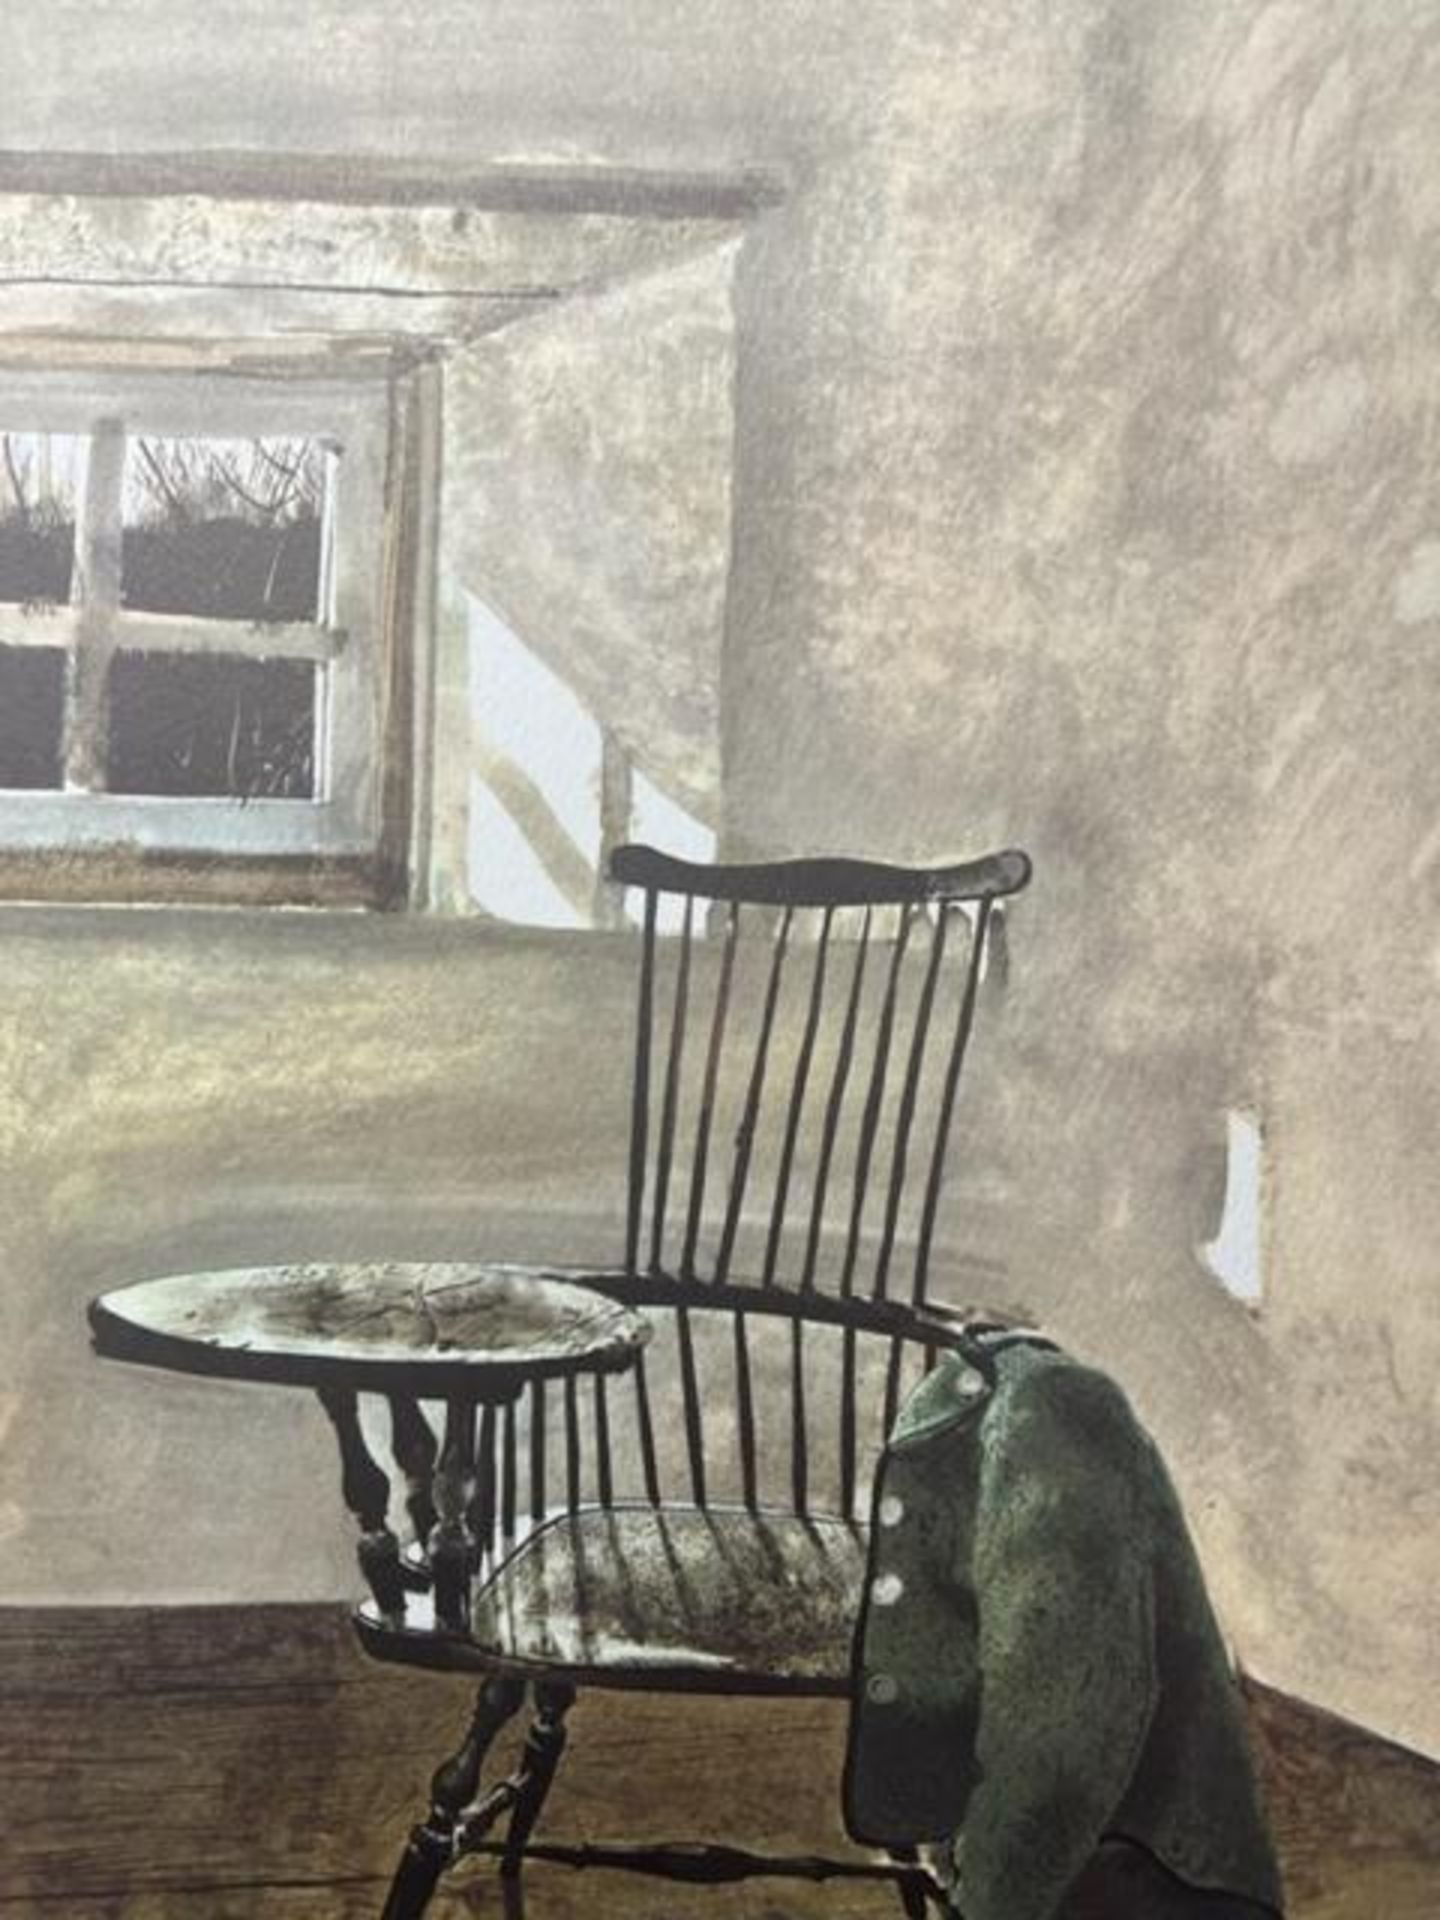 Andrew Wyeth "Early October" Print.